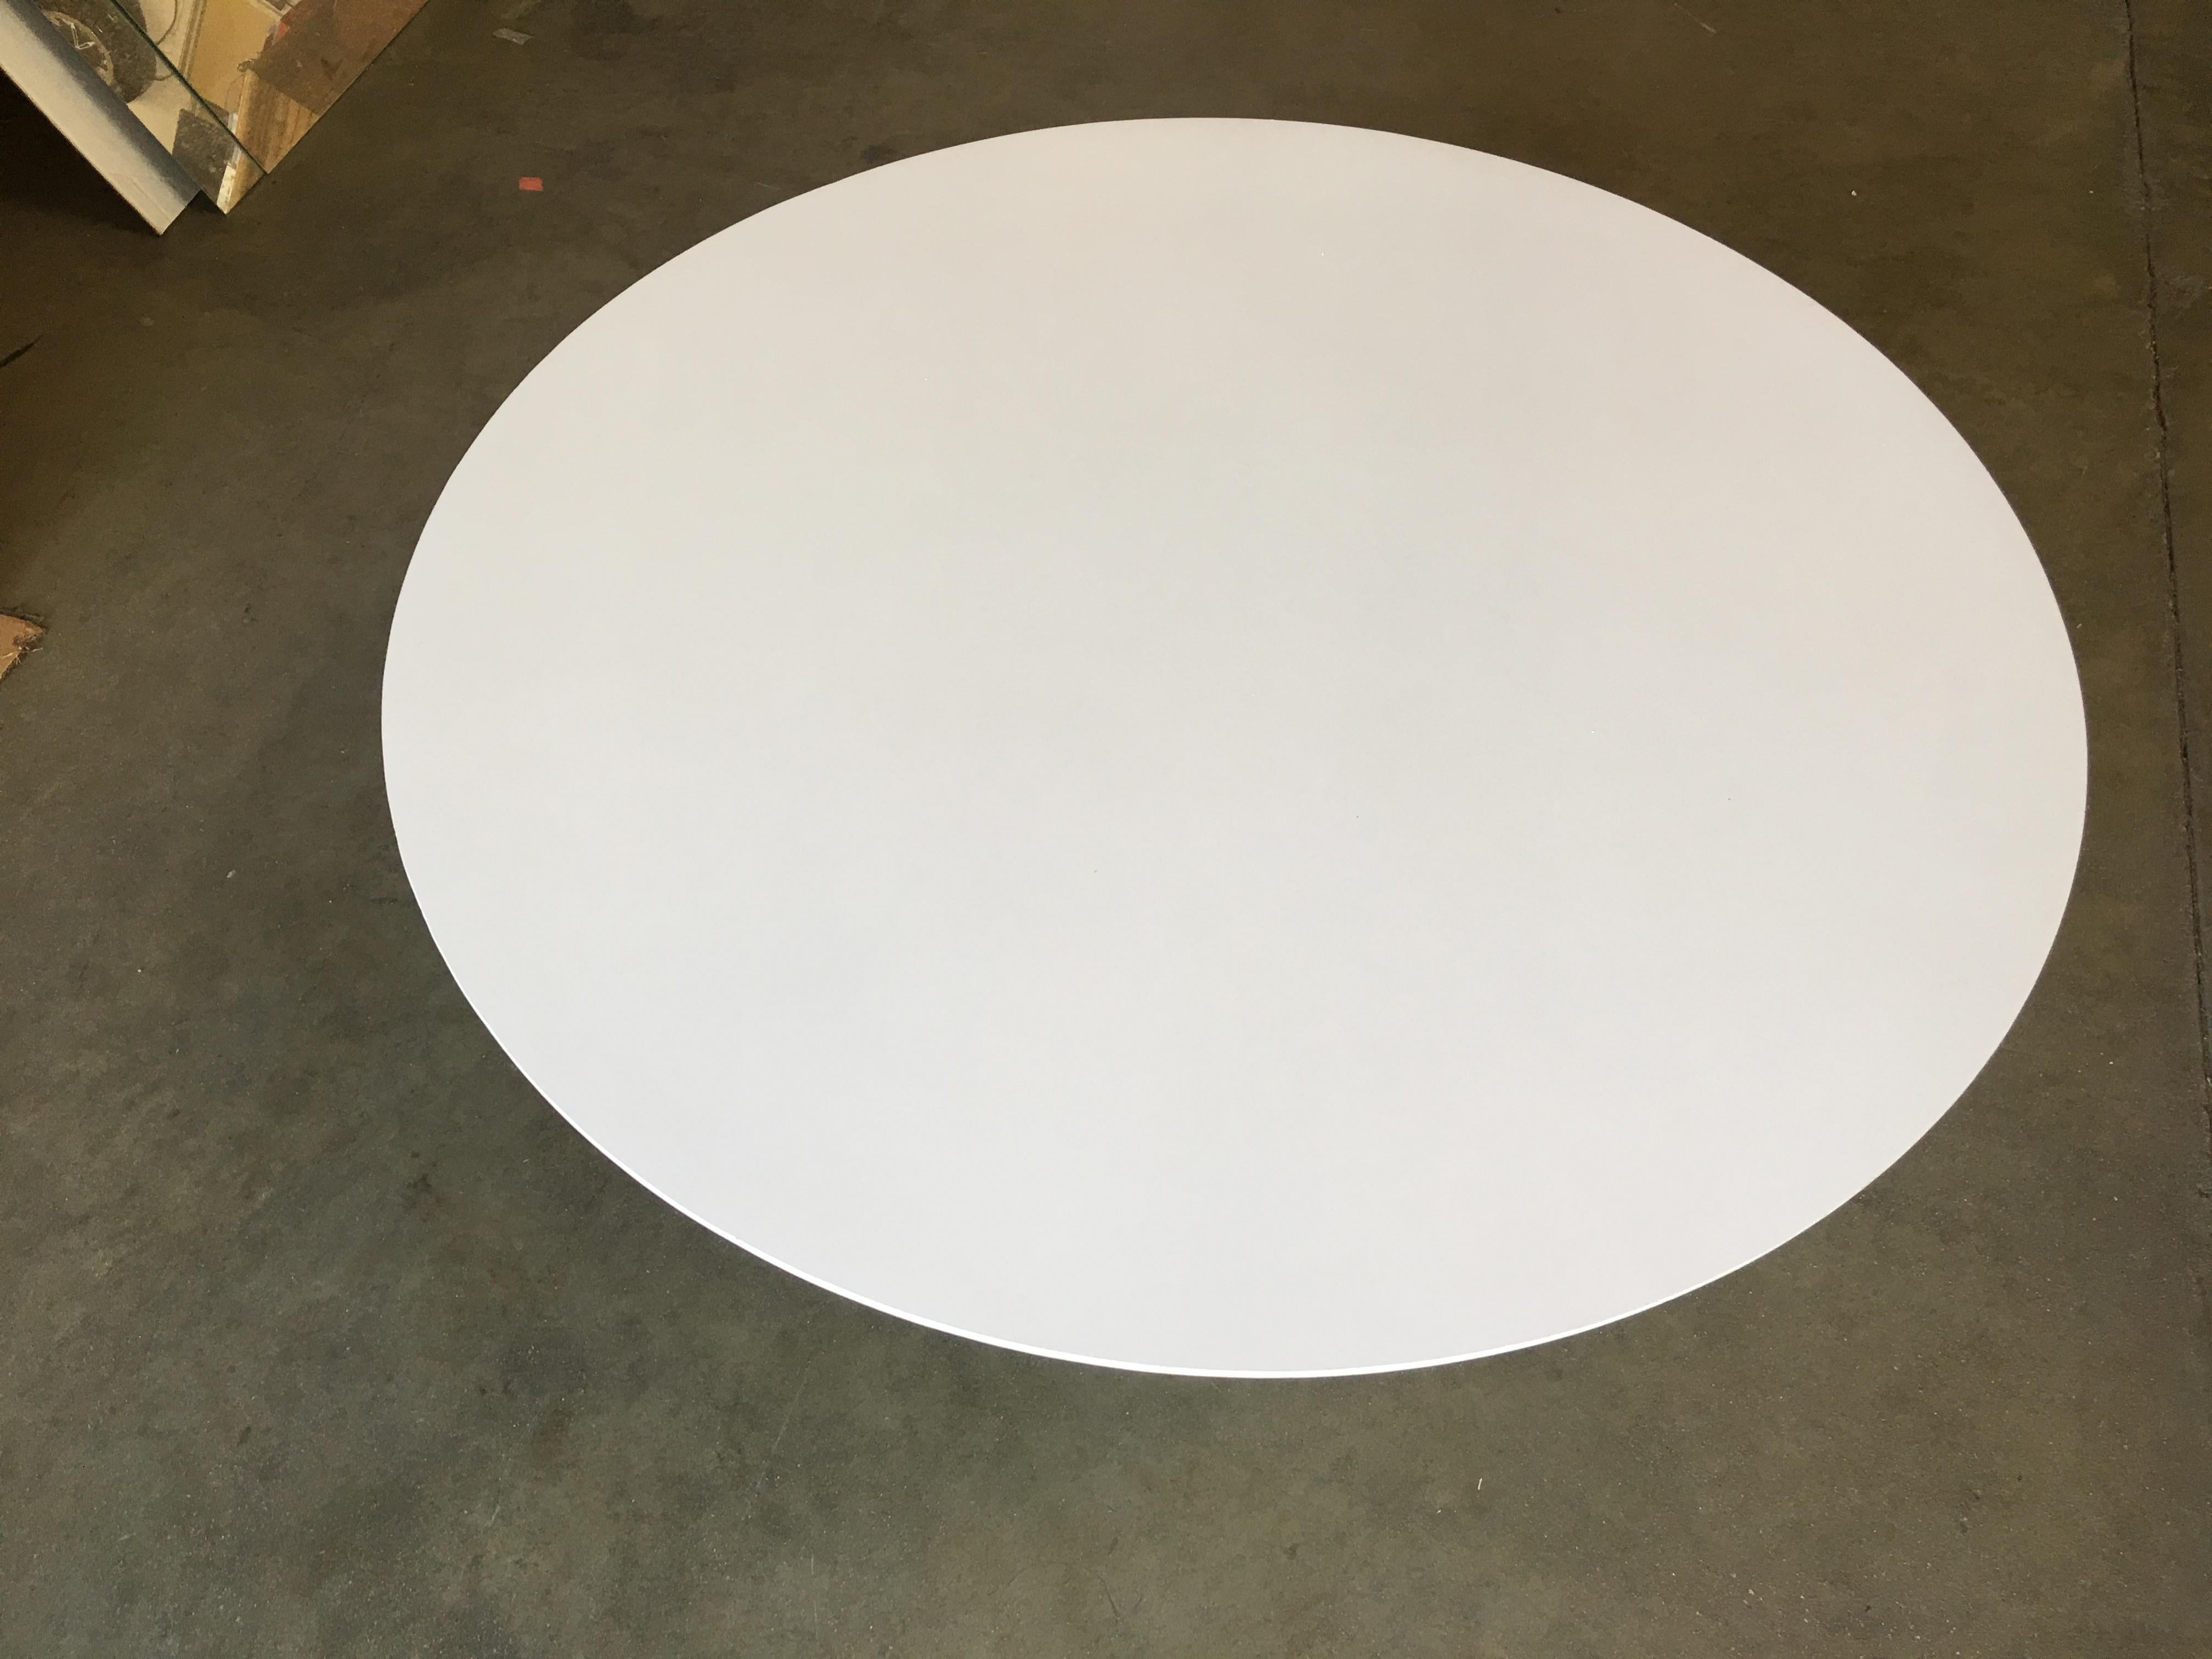 Late 20th Century Round Tulip Coffee Table by Eero Saarinen for Knoll, Circa 1970s